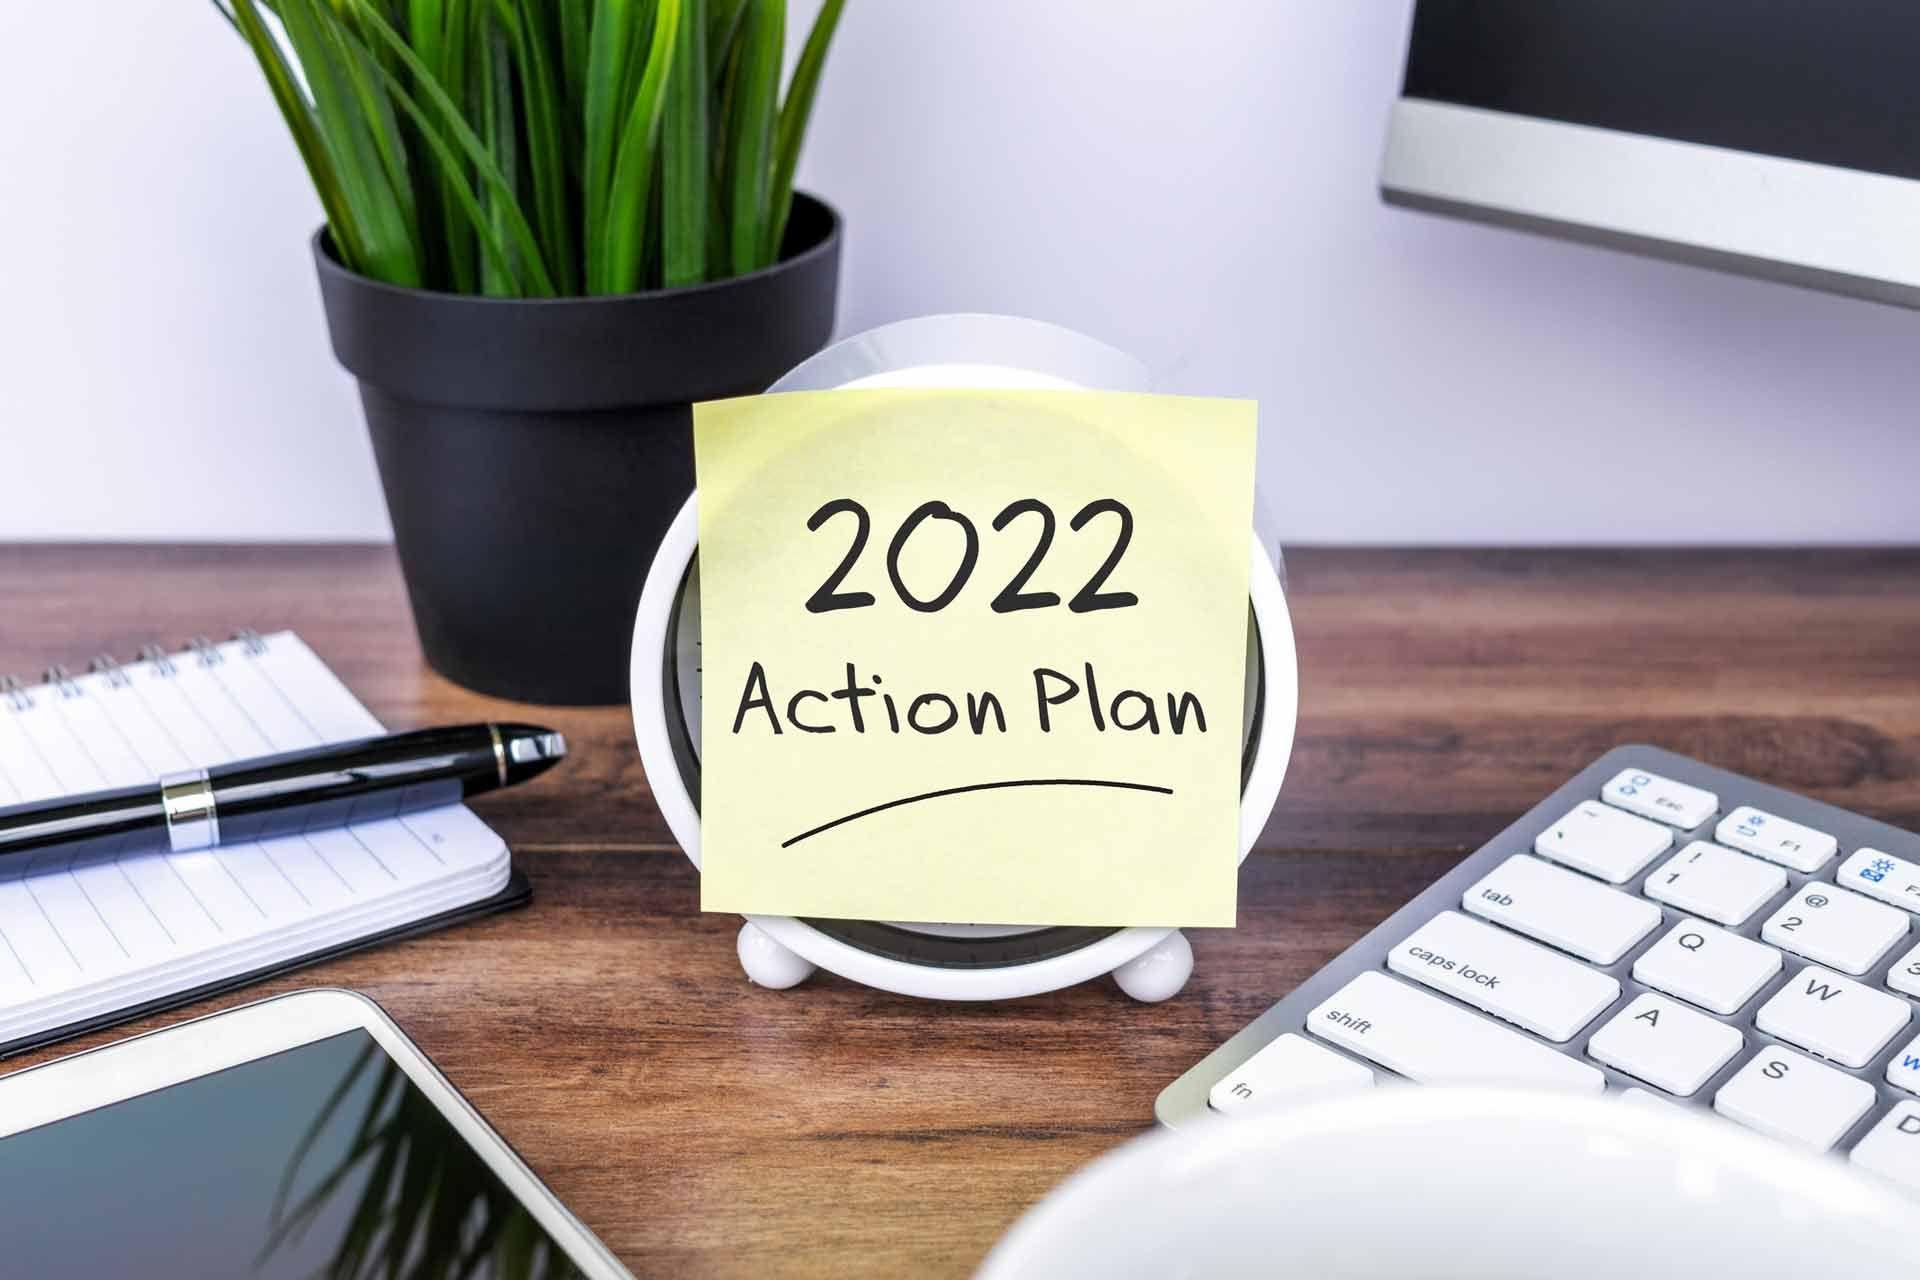 Desk with a post it that says 2022 action plan